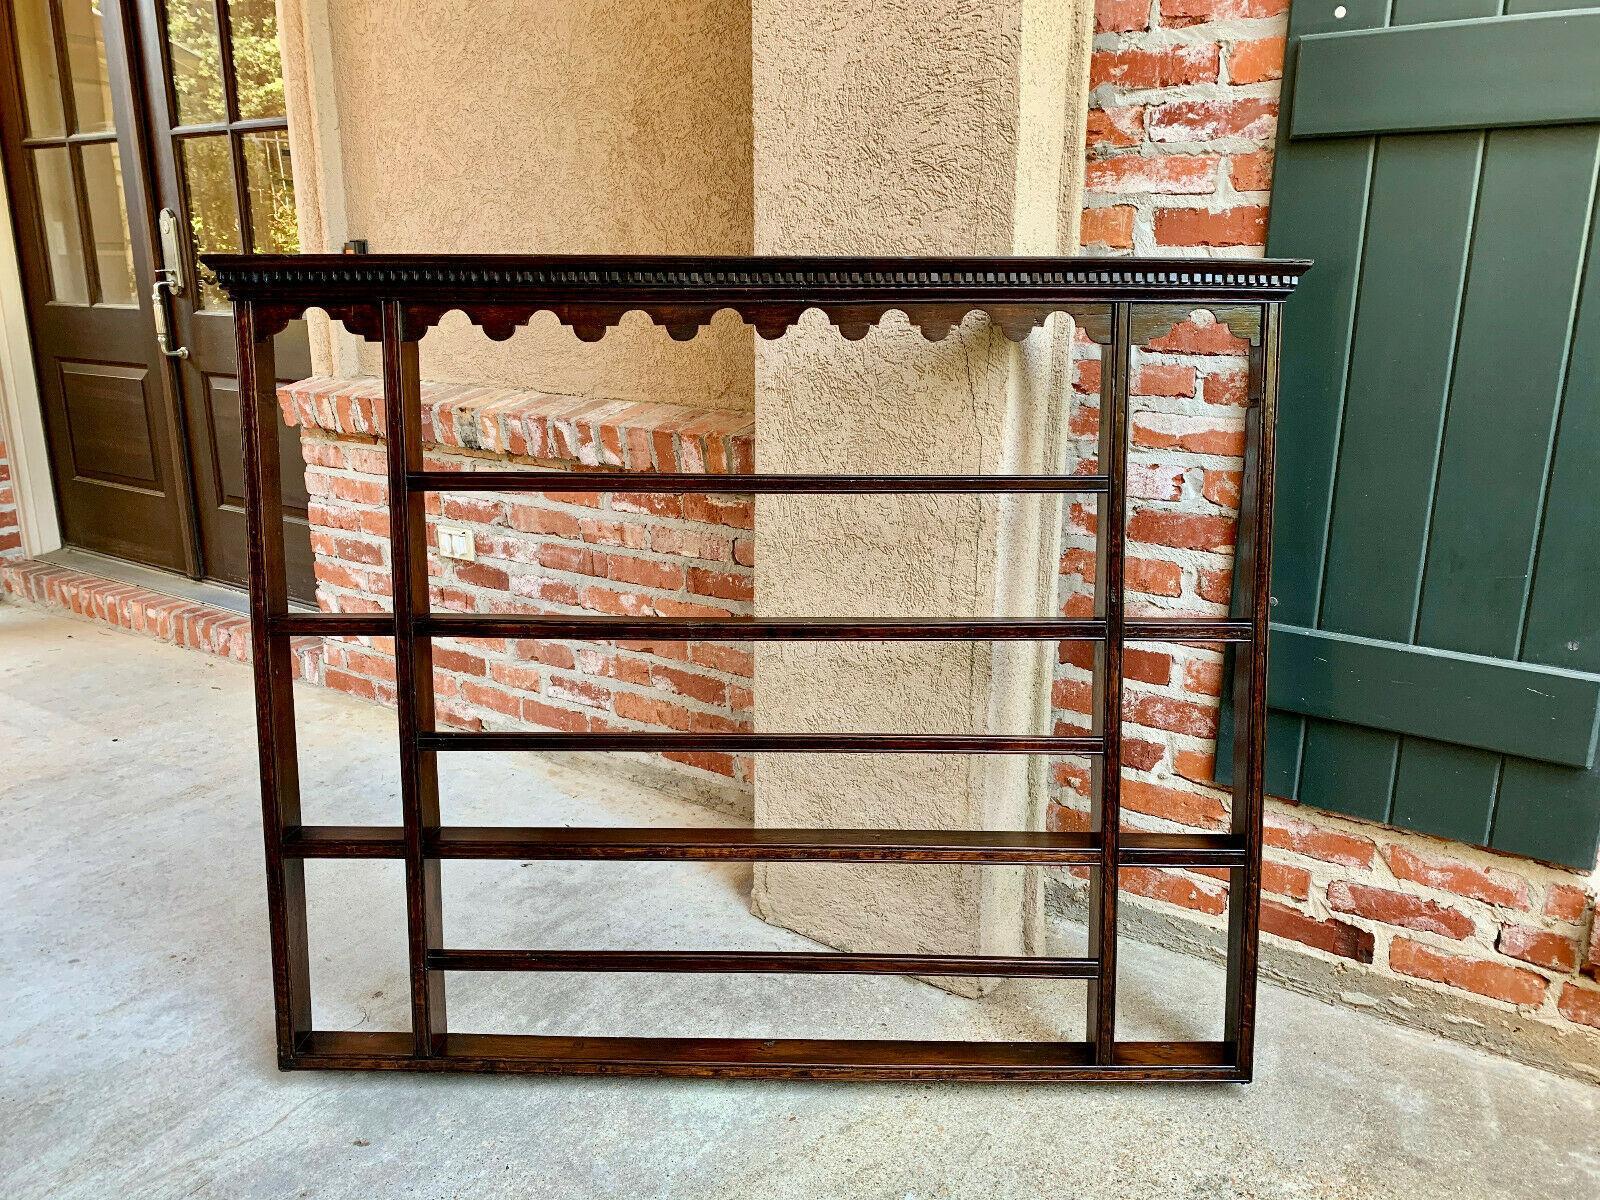 ~Direct from England~
~Large size, true antique English plate rack with so many different size display shelves!~
~Large crown, featuring dentil molding across the entire crown and arched scalloped tops on the upper cubbyholes~
~All shelves having